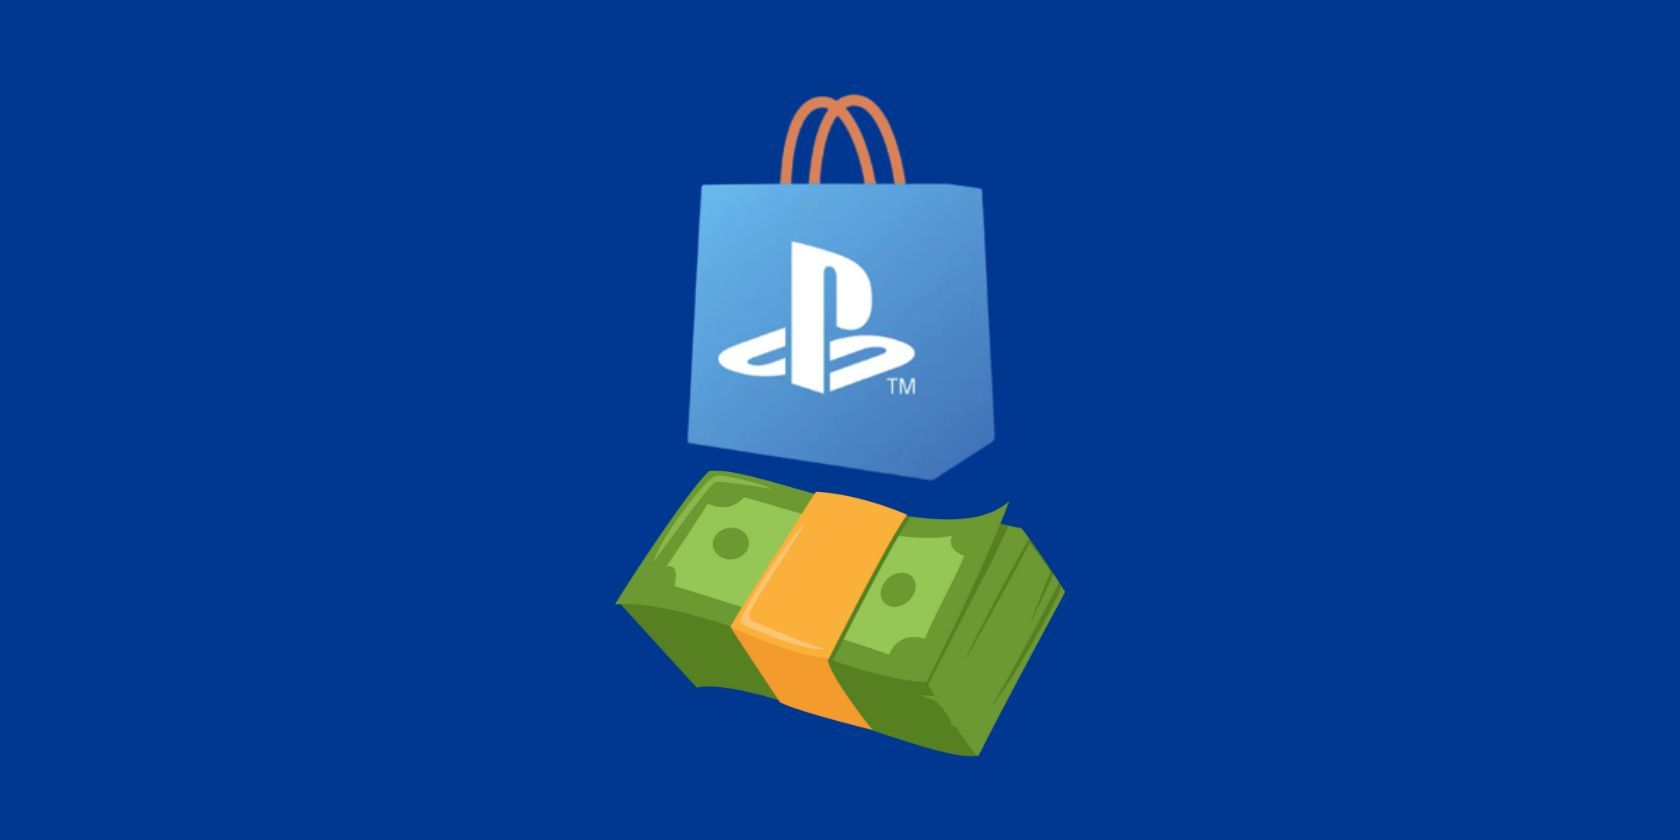 How to Fund Your PSN Wallet - PlayStation 4 Guide - IGN